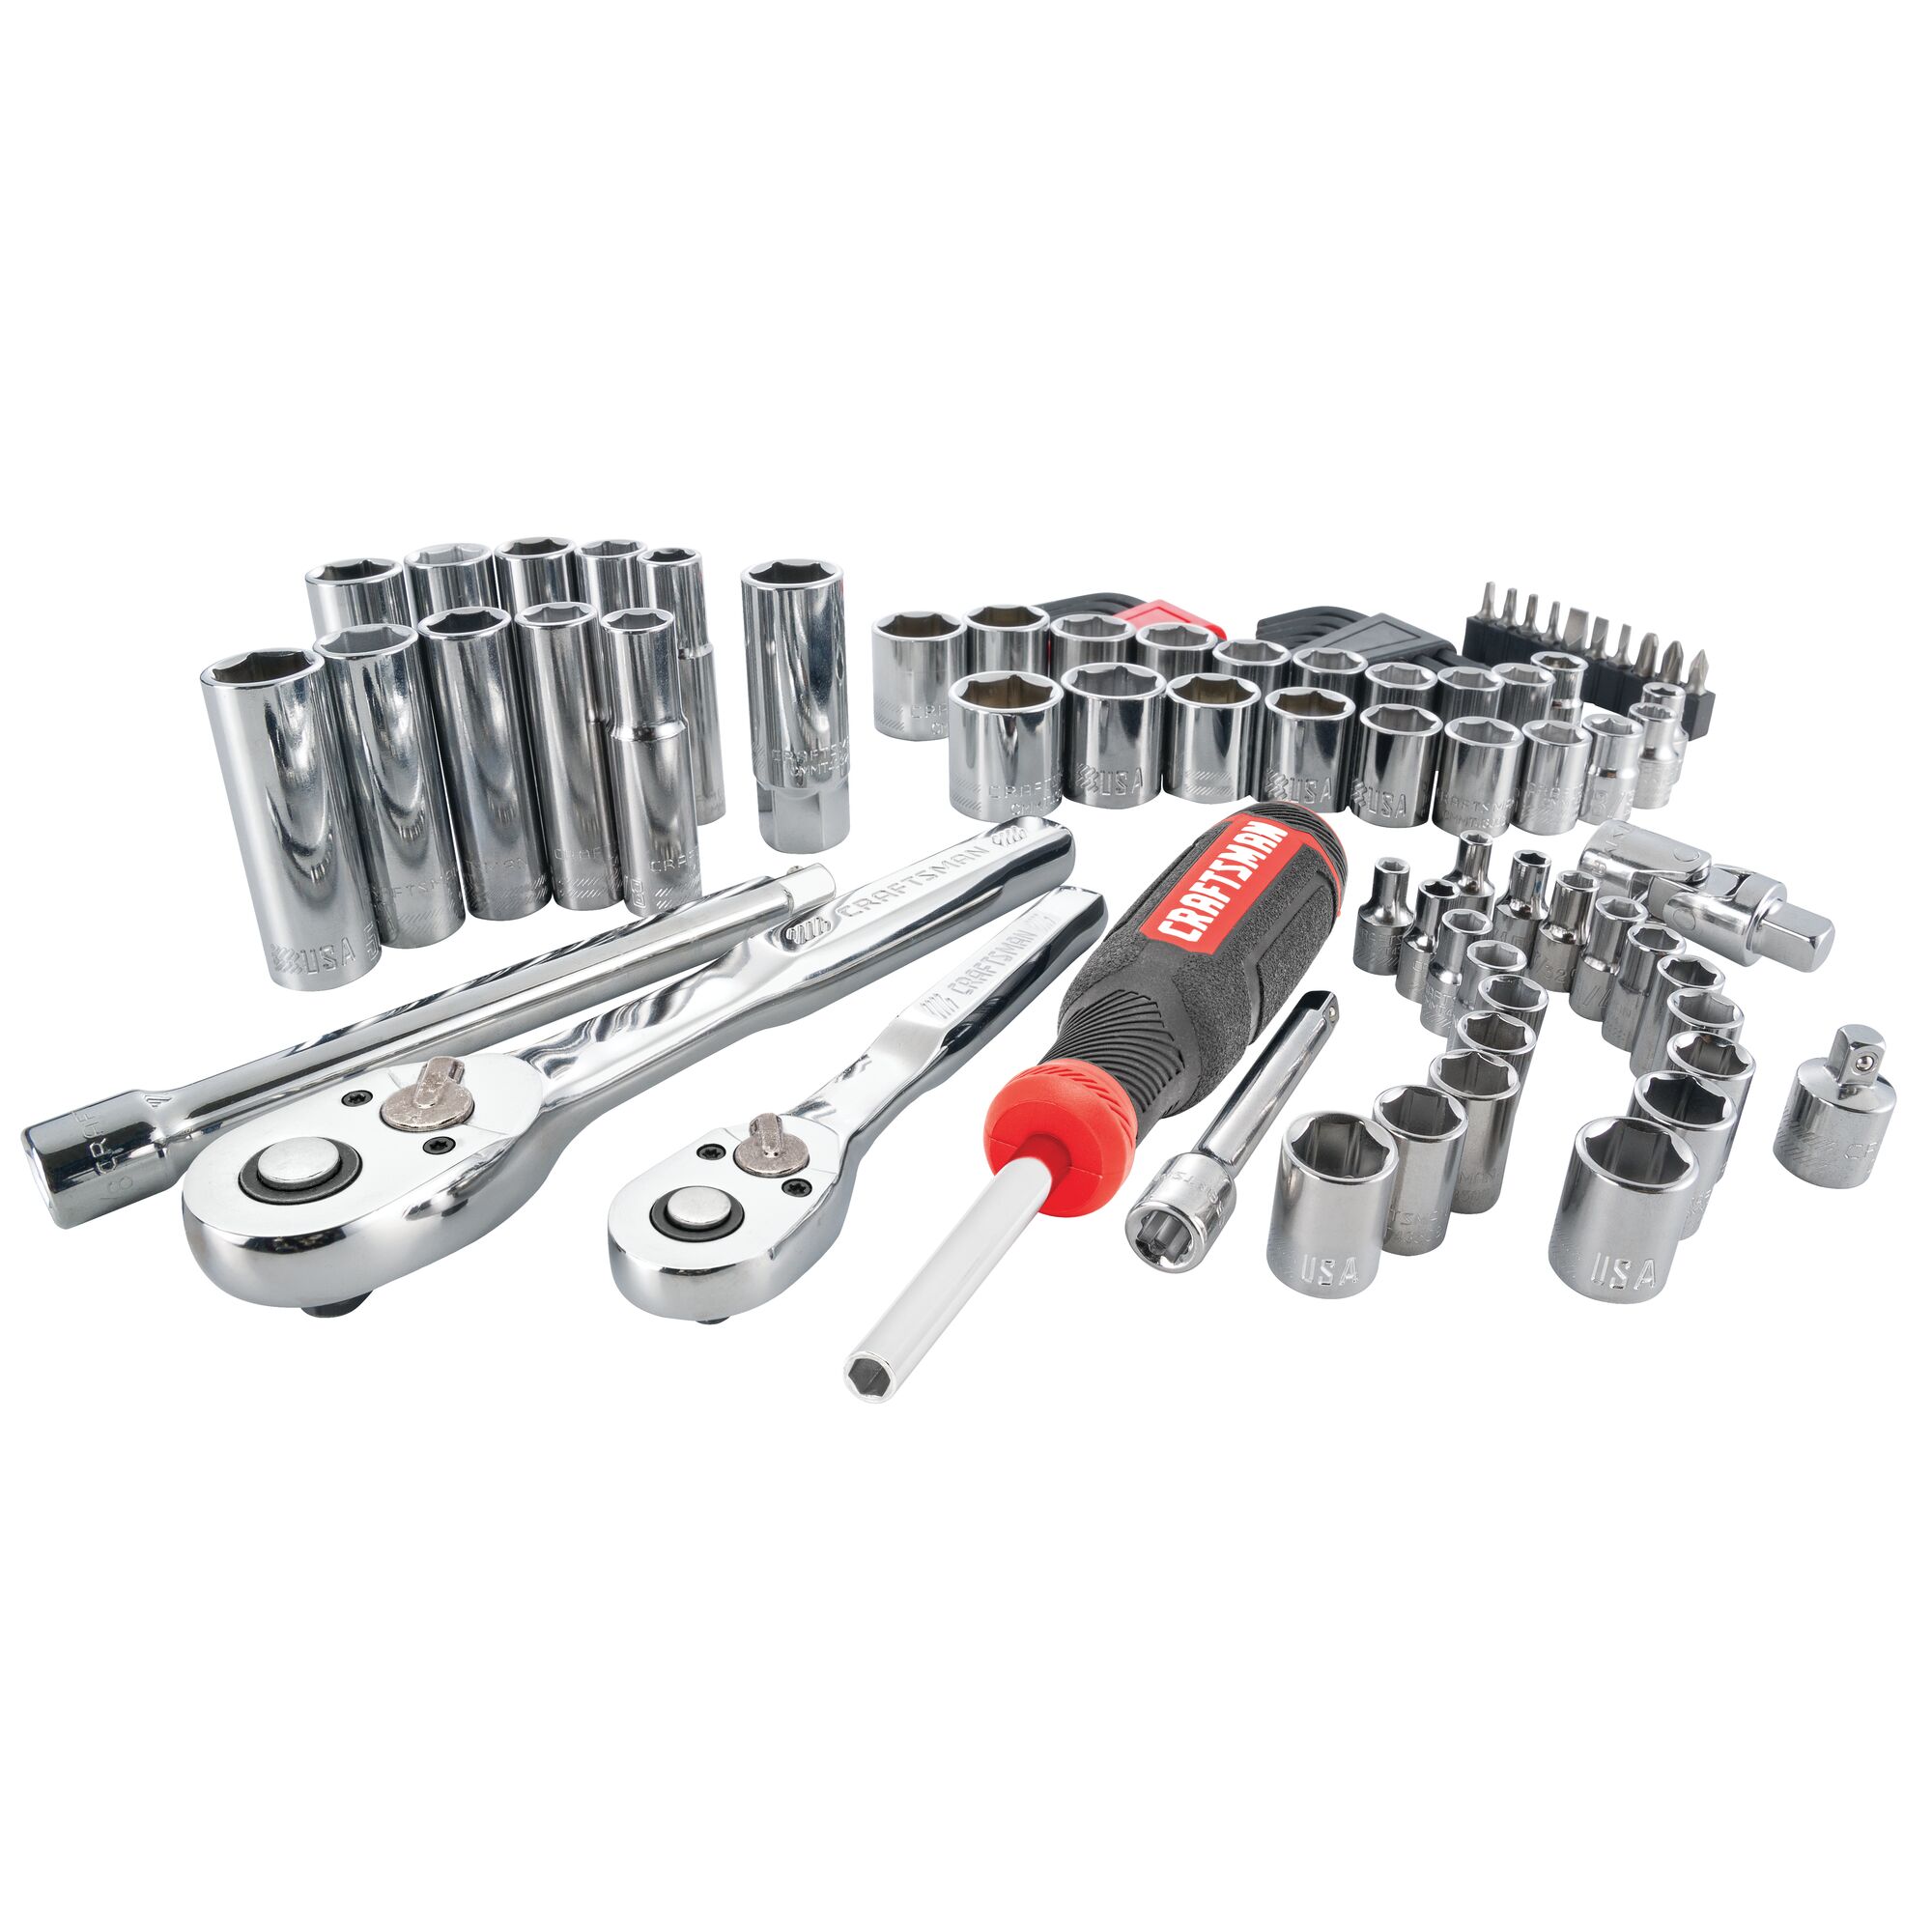 in Sets and Hard 88-Piece Mechanics Chrome department Polished with the CRAFTSMAN Standard Mechanics Case at Tool Set Metric (SAE) Tool